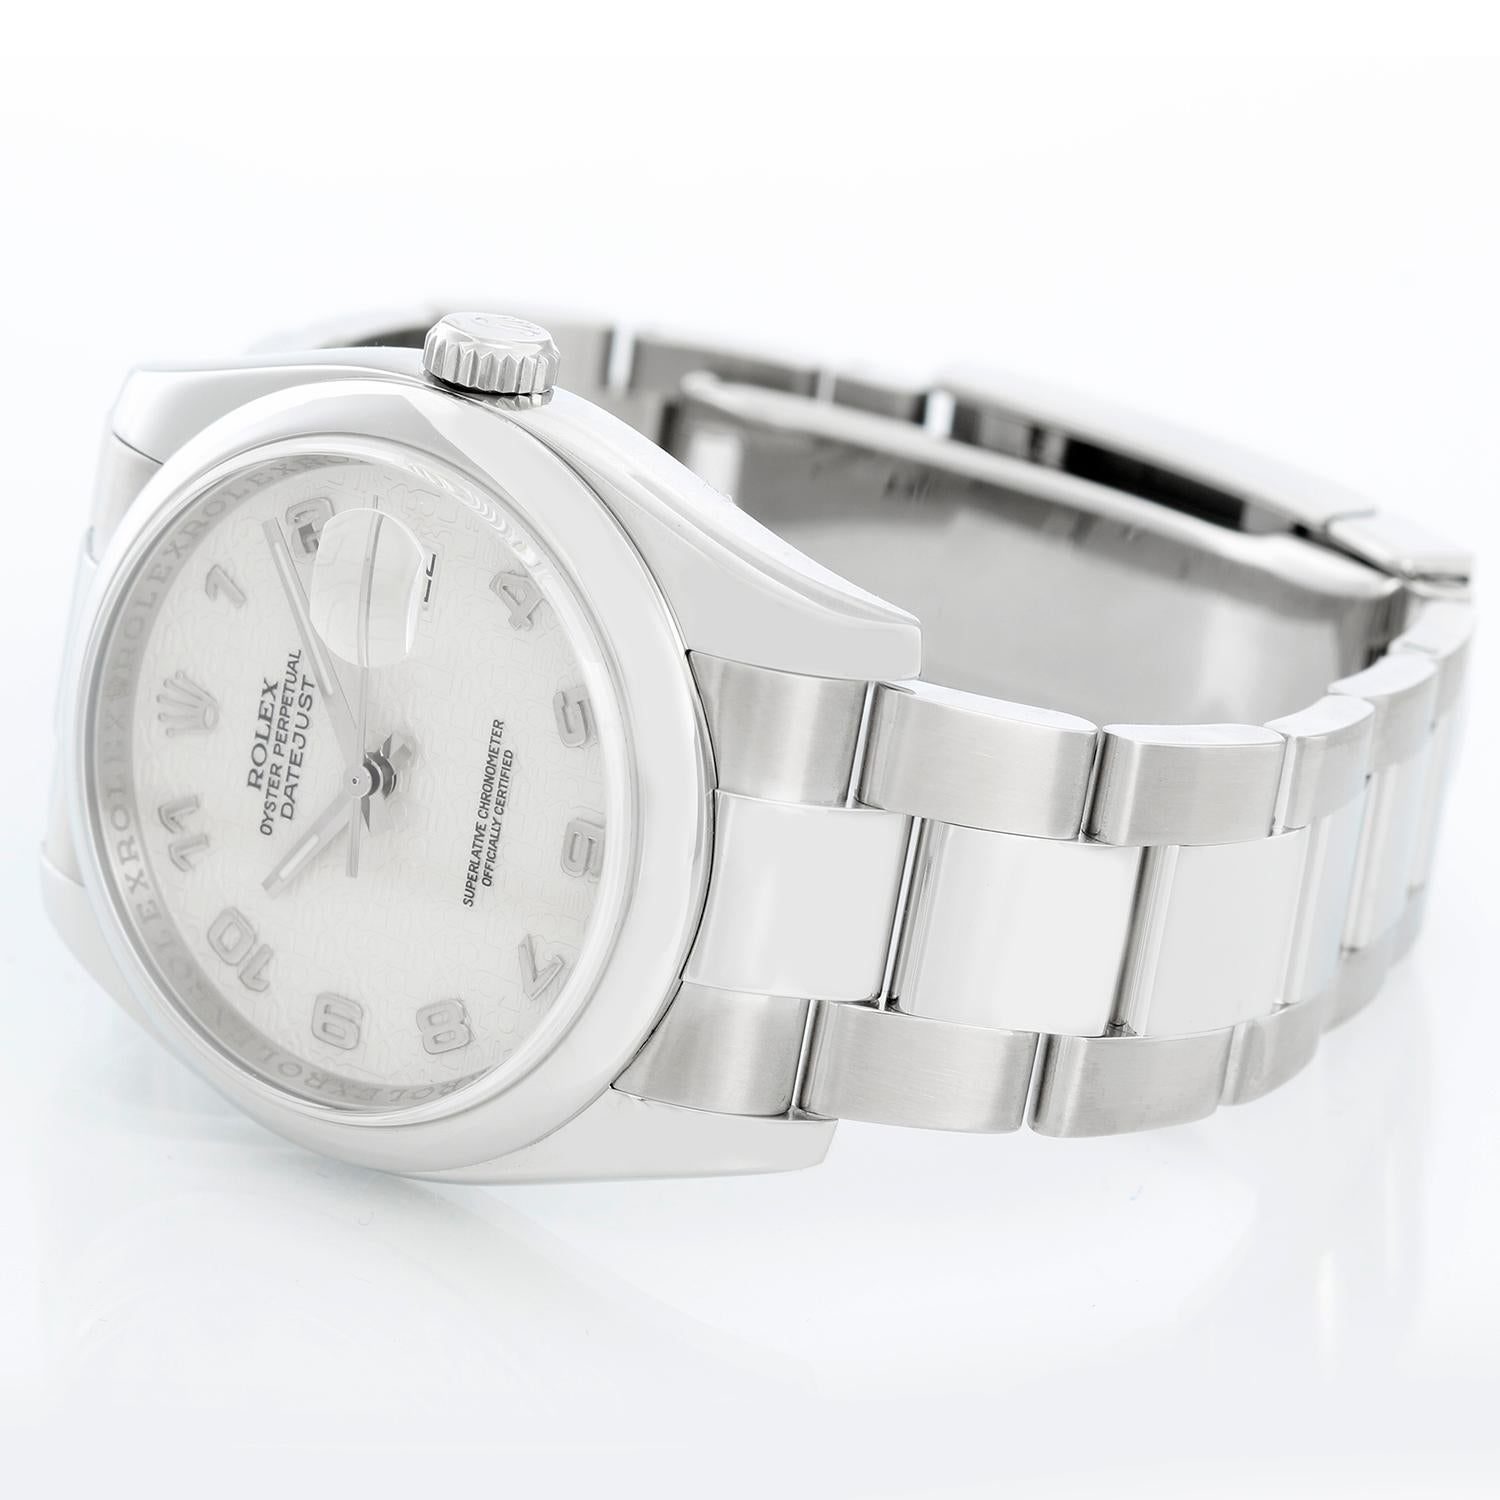 Rolex Datejust Men's Steel Watch 116200 - Automatic winding, 31 jewels, Quickset, sapphire crystal. Stainless steel case with smooth bezel. Cream jubilee Dial . Stainless steel Oyster bracelet. Pre-owned with custom box